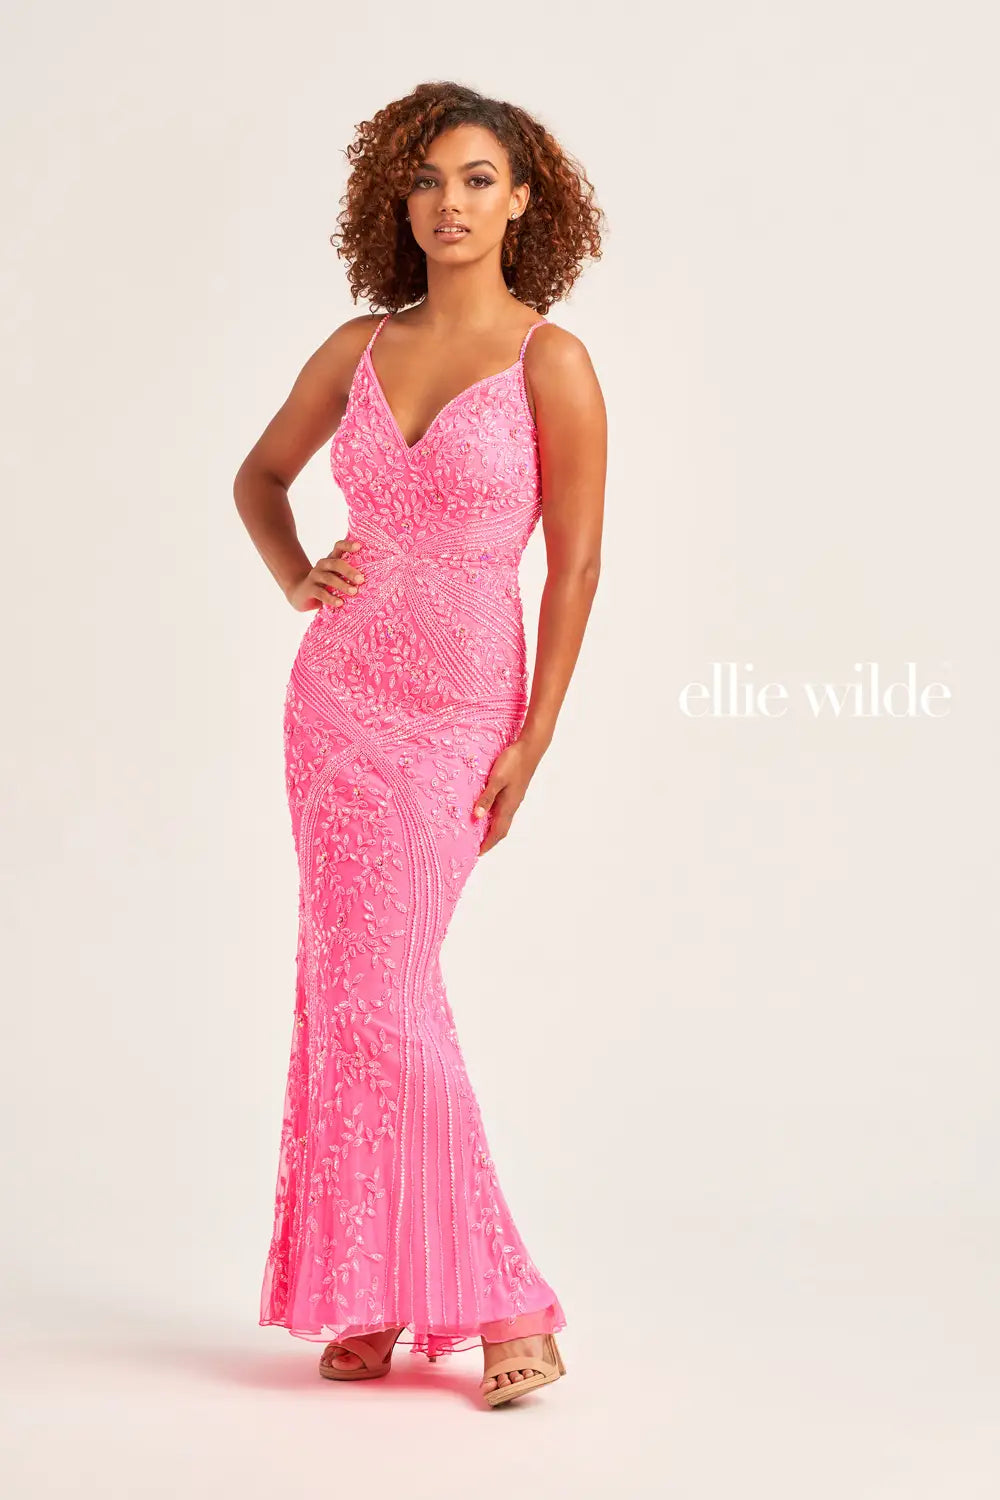 Have an everlasting sparkle when you wear this fully beaded Ellie Wilde prom dress EW35065. This fitted dress features an adjustable fitted bodice with a V-neckline that features adjustable shoulder straps for the perfect fit. Symmetrically sewn beaded patterns give you a radiant shine throughout the entire dress.